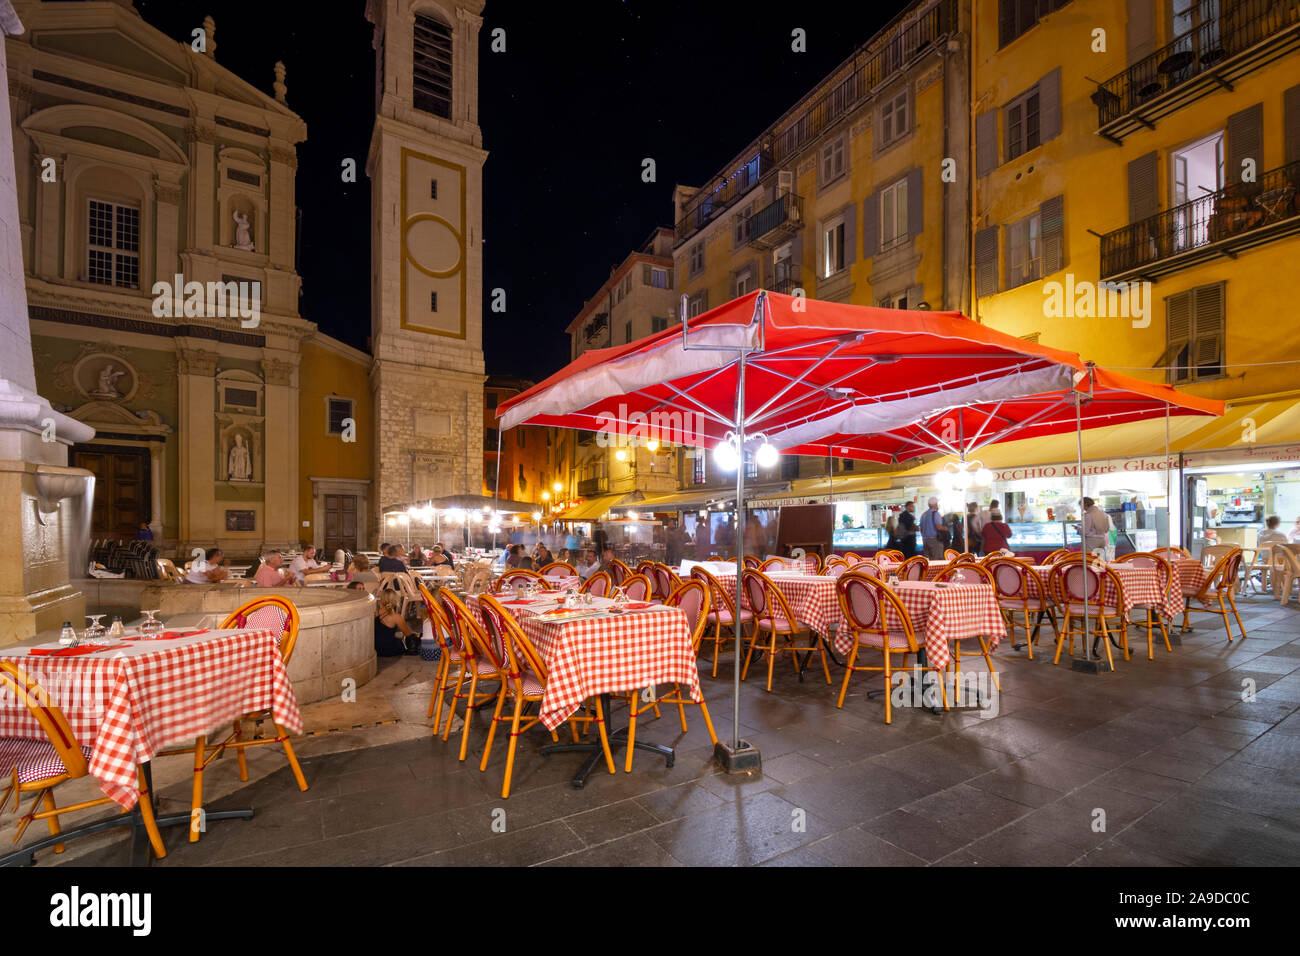 Tourists enjoy a late night at a sidewalk cafe and gelateria in the picturesque Place Rossetti square in Old Town Vieux Nice, France. Stock Photo